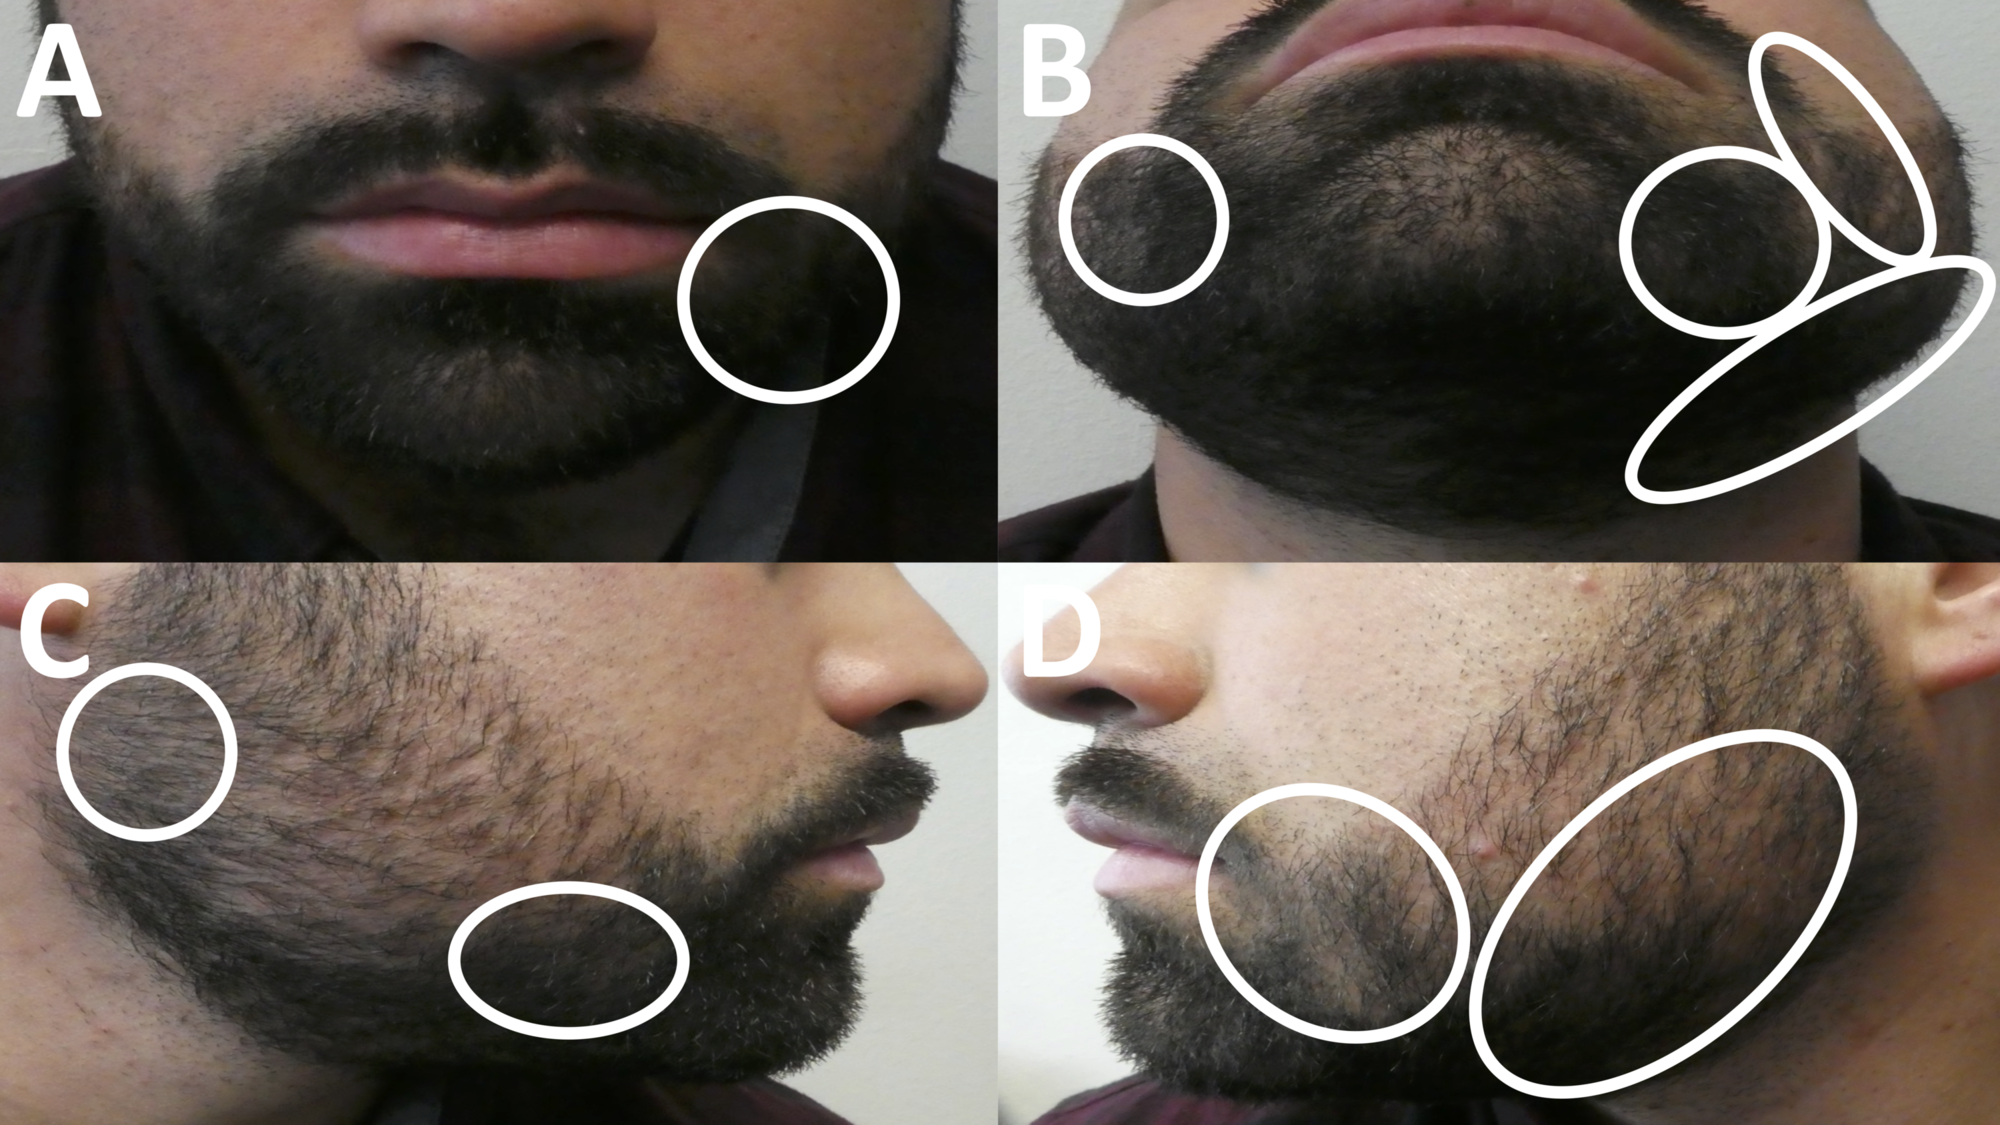 Cureus | Incipient Diabetes Mellitus and Nascent Thyroid Disease Presenting  as Beard Alopecia Areata: Case Report and Treatment Review of Alopecia  Areata of the Beard | Article